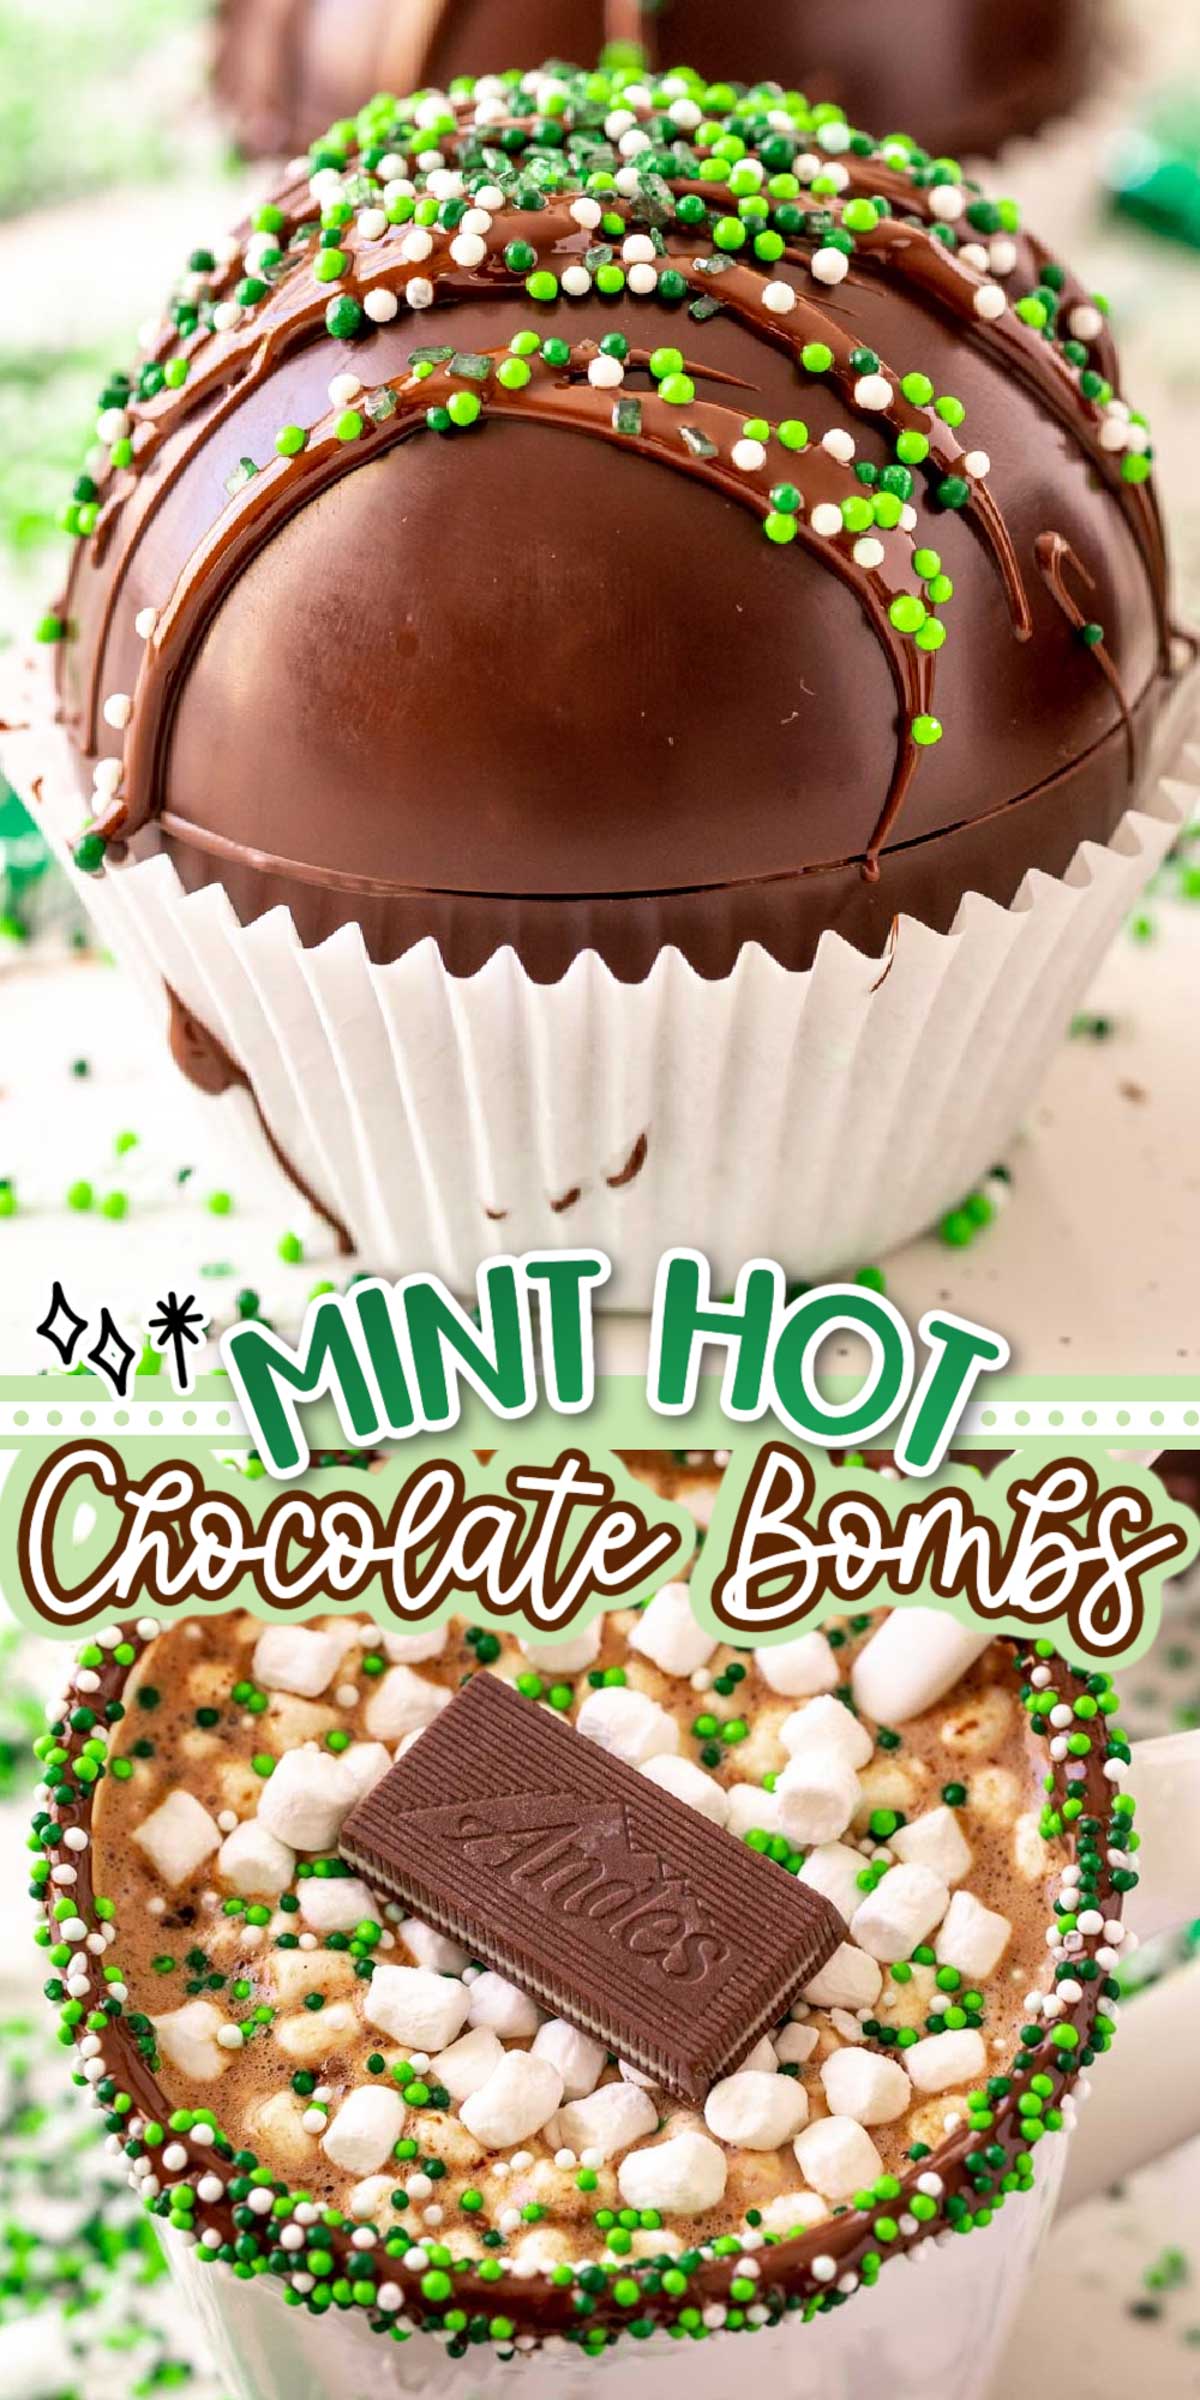 Mint Hot Chocolate Bombs are a fun way to fill your favorite mug with rich, creamy hot cocoa and a sweet hint of mint that everyone will love! via @sugarandsoulco